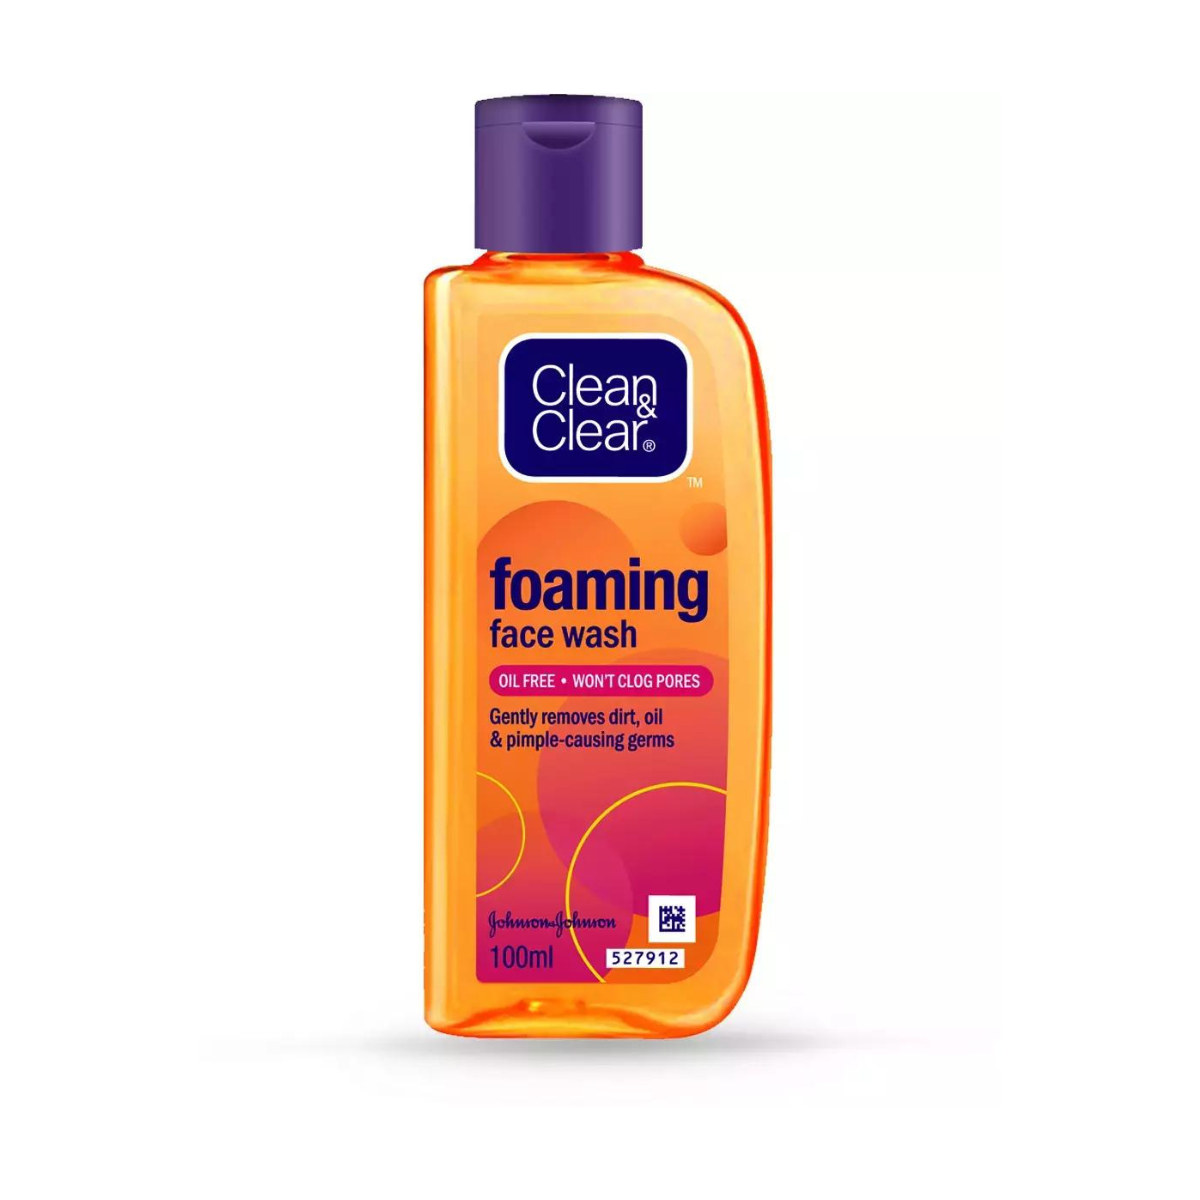 Clean & Clear Foaming Face Wash - Oil Free Won't Clog Pores - Gently Removes Dirt, Oil & Pimple Causing Germ - 100g